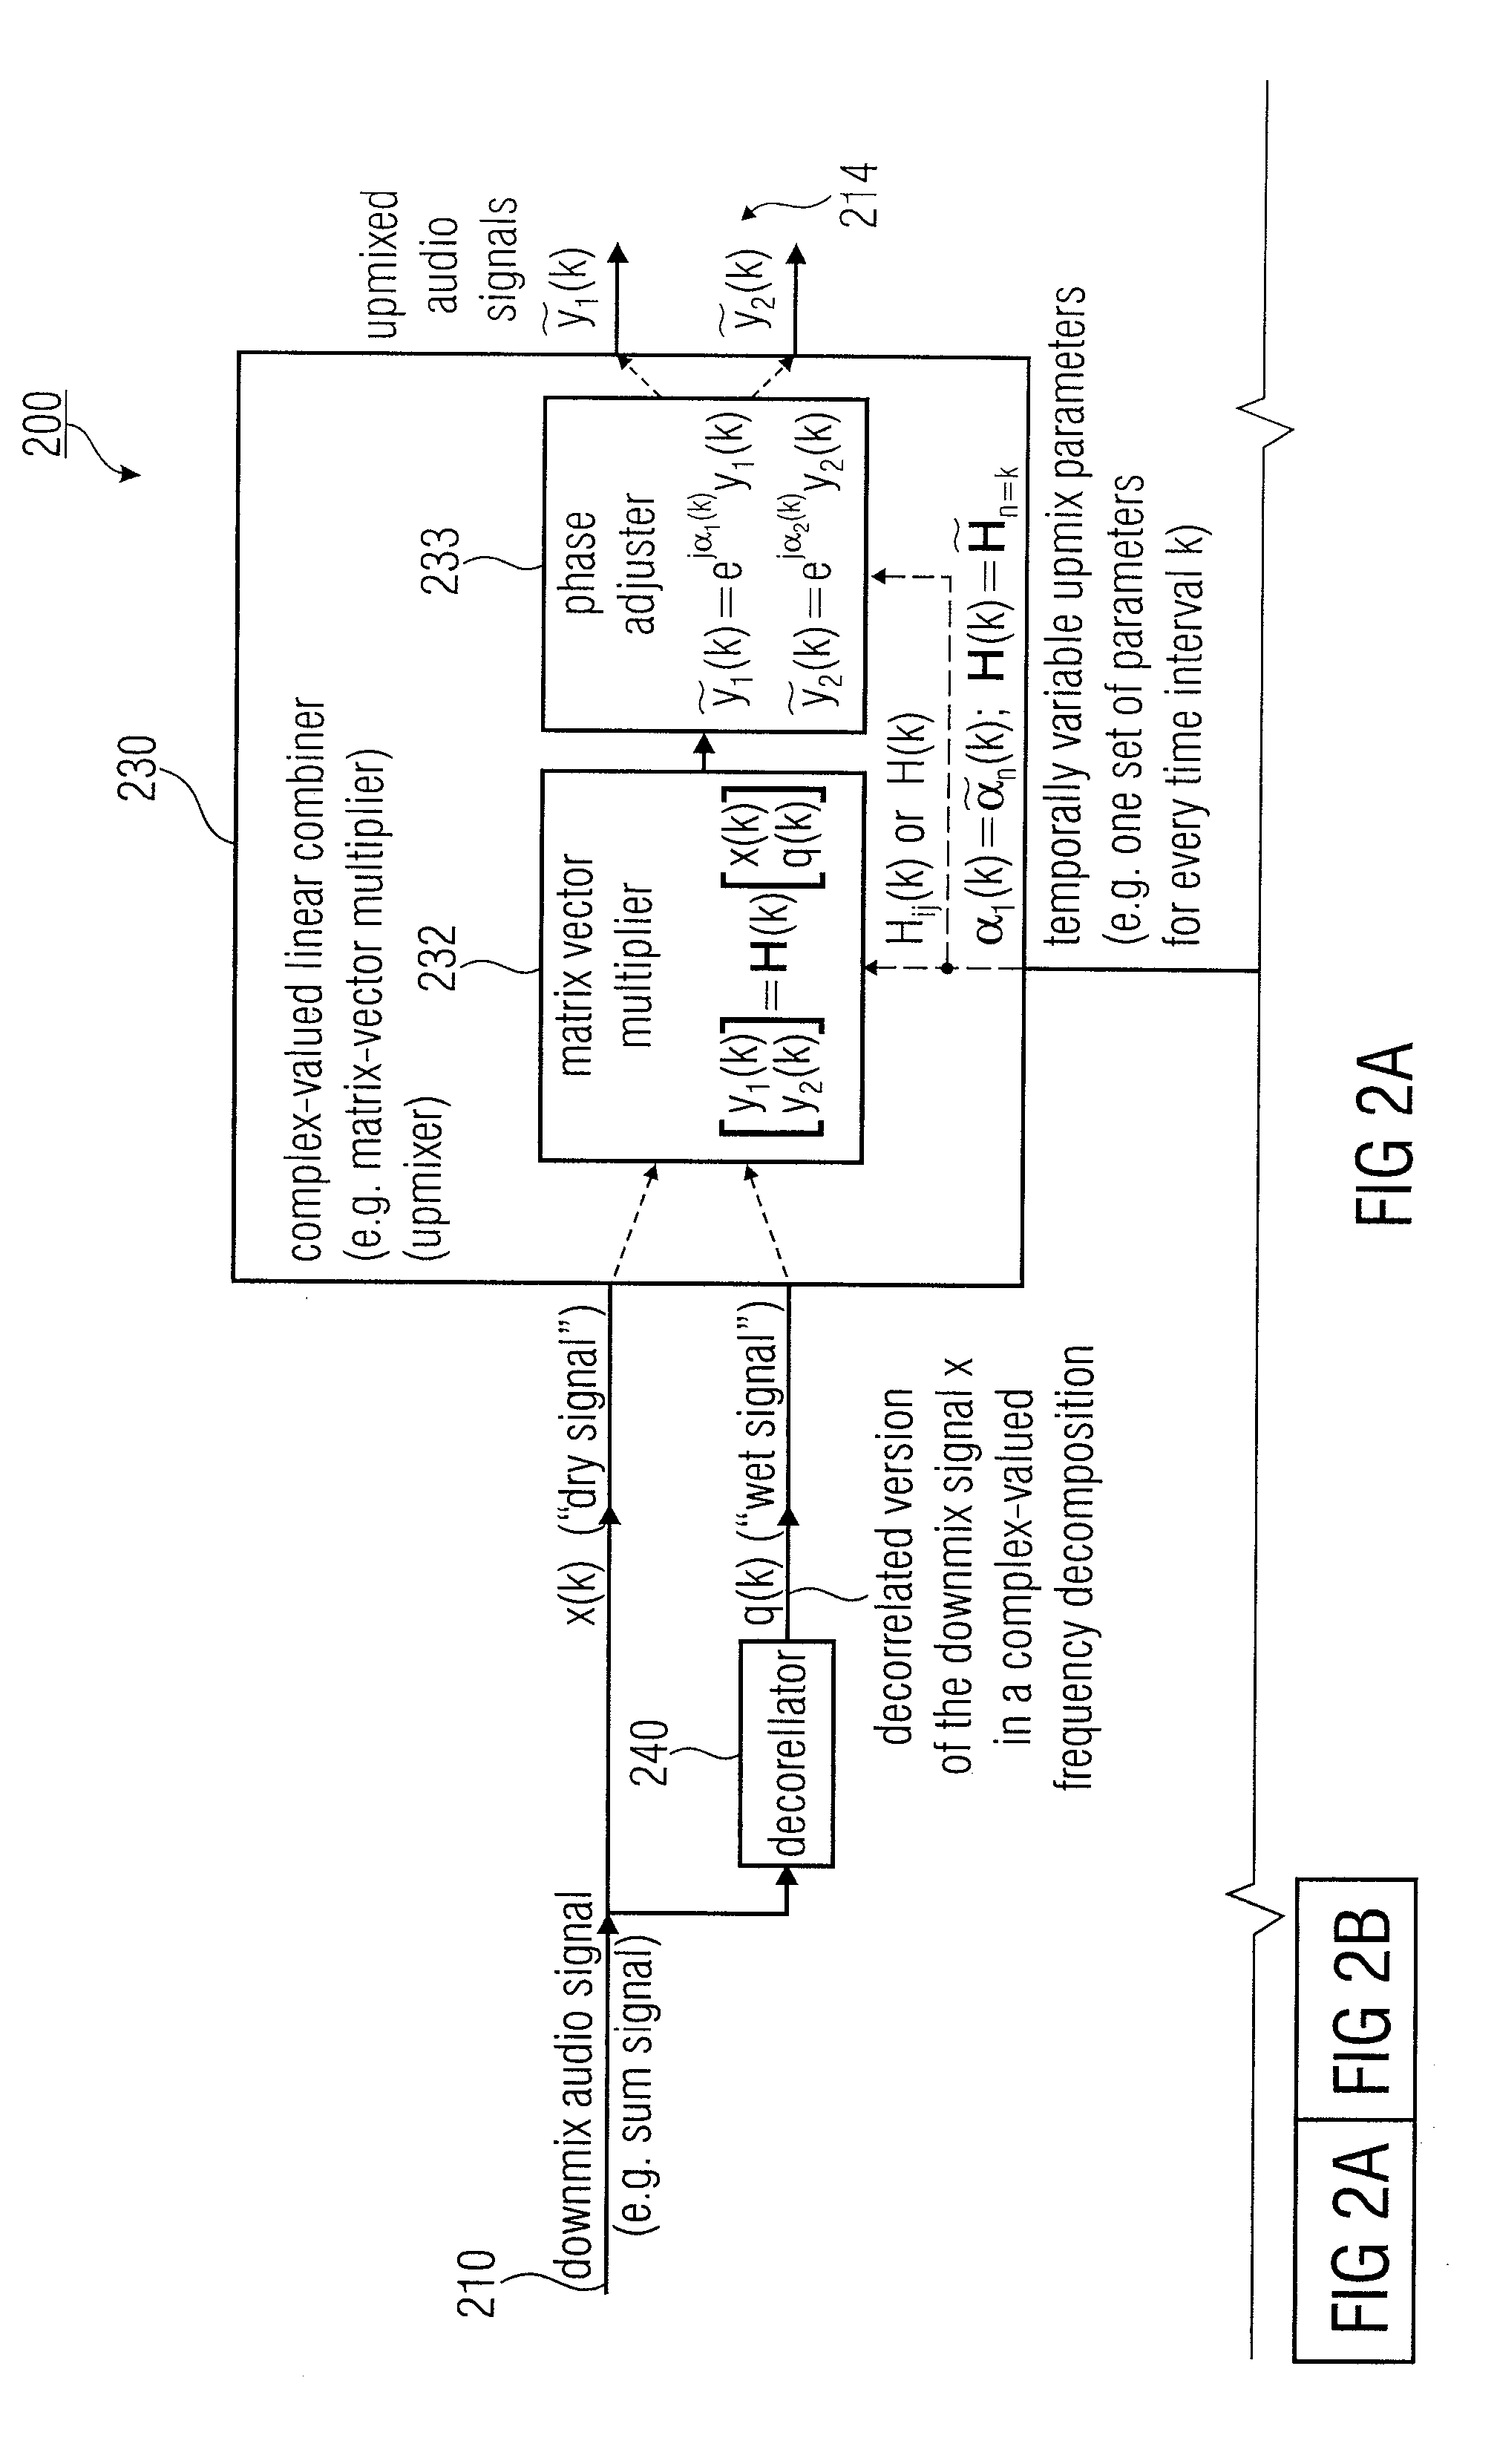 Apparatus, method and computer program for upmixing a downmix audio signal using a phase value smoothing